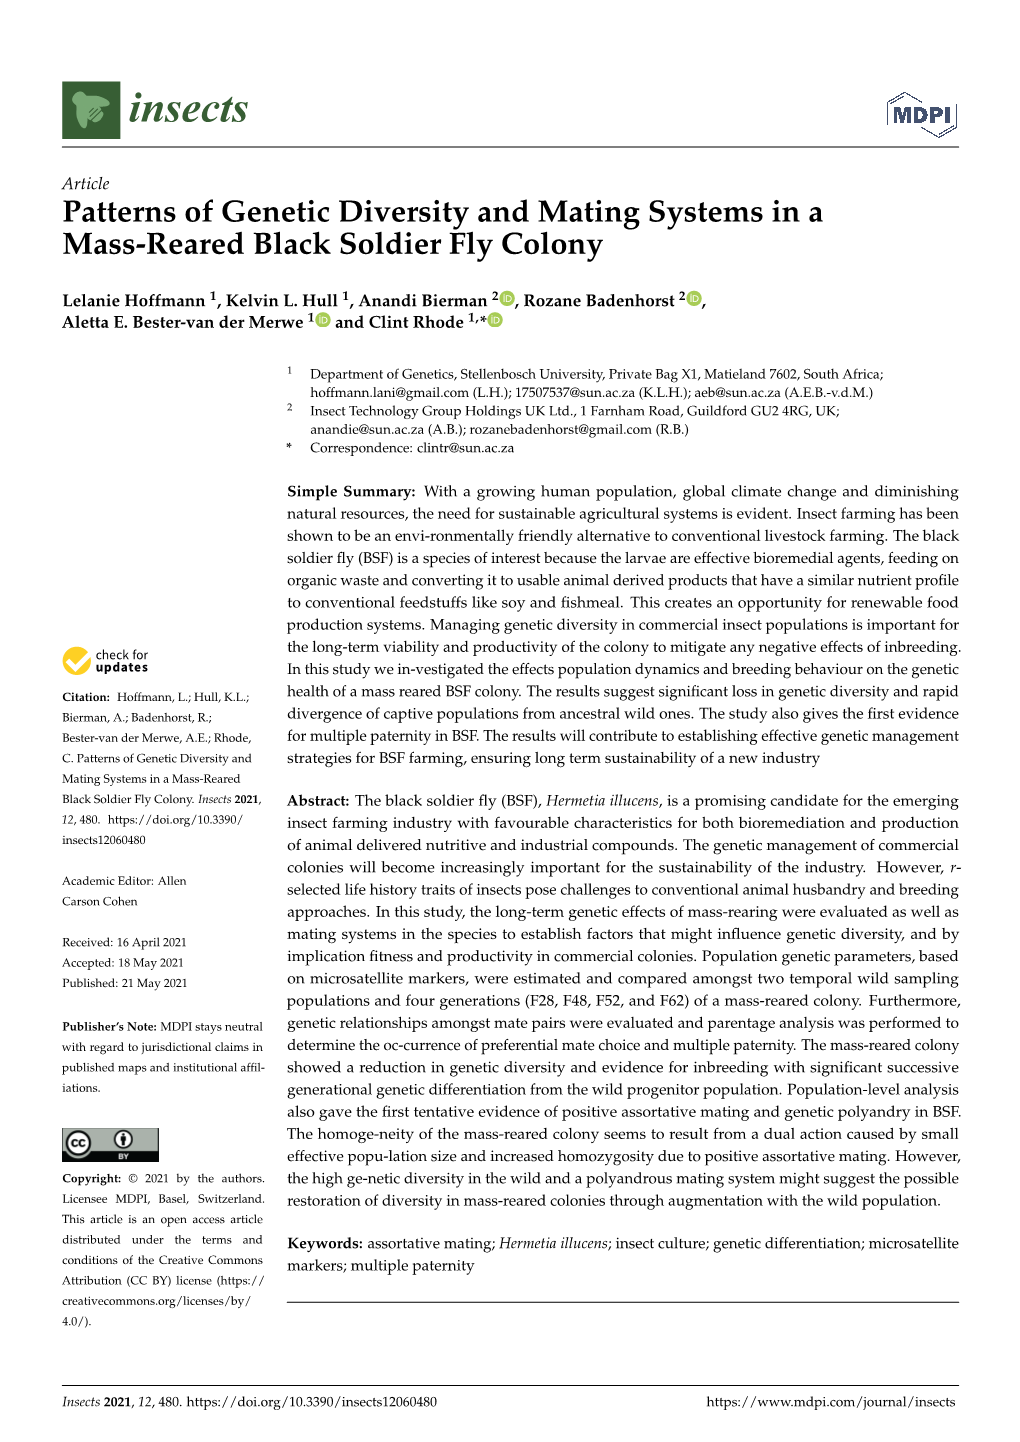 Patterns of Genetic Diversity and Mating Systems in a Mass-Reared Black Soldier Fly Colony